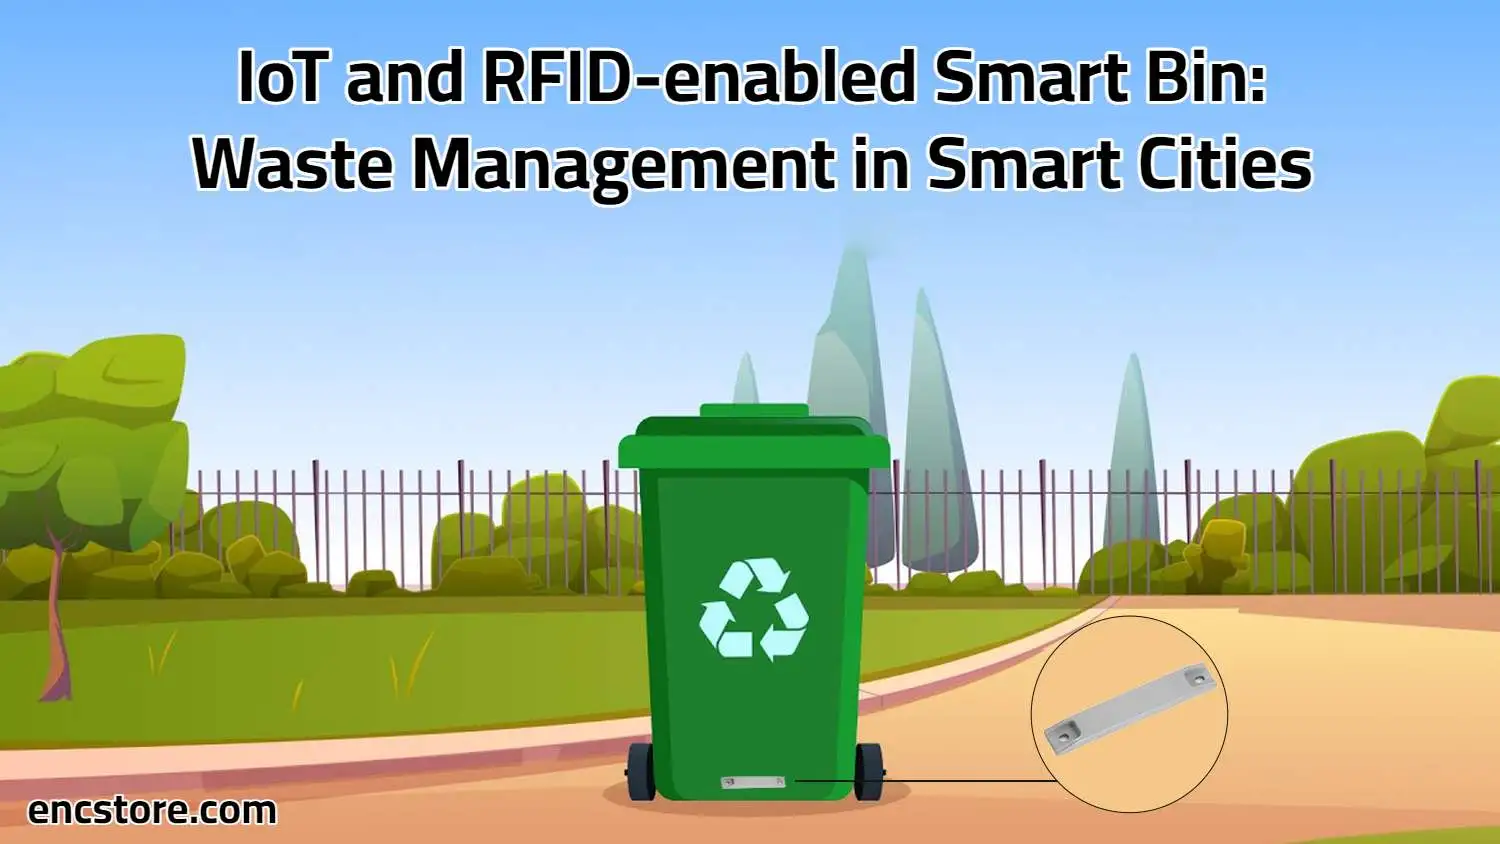 IoT and RFID-enabled Smart Bin: Waste Management in Smart Cities